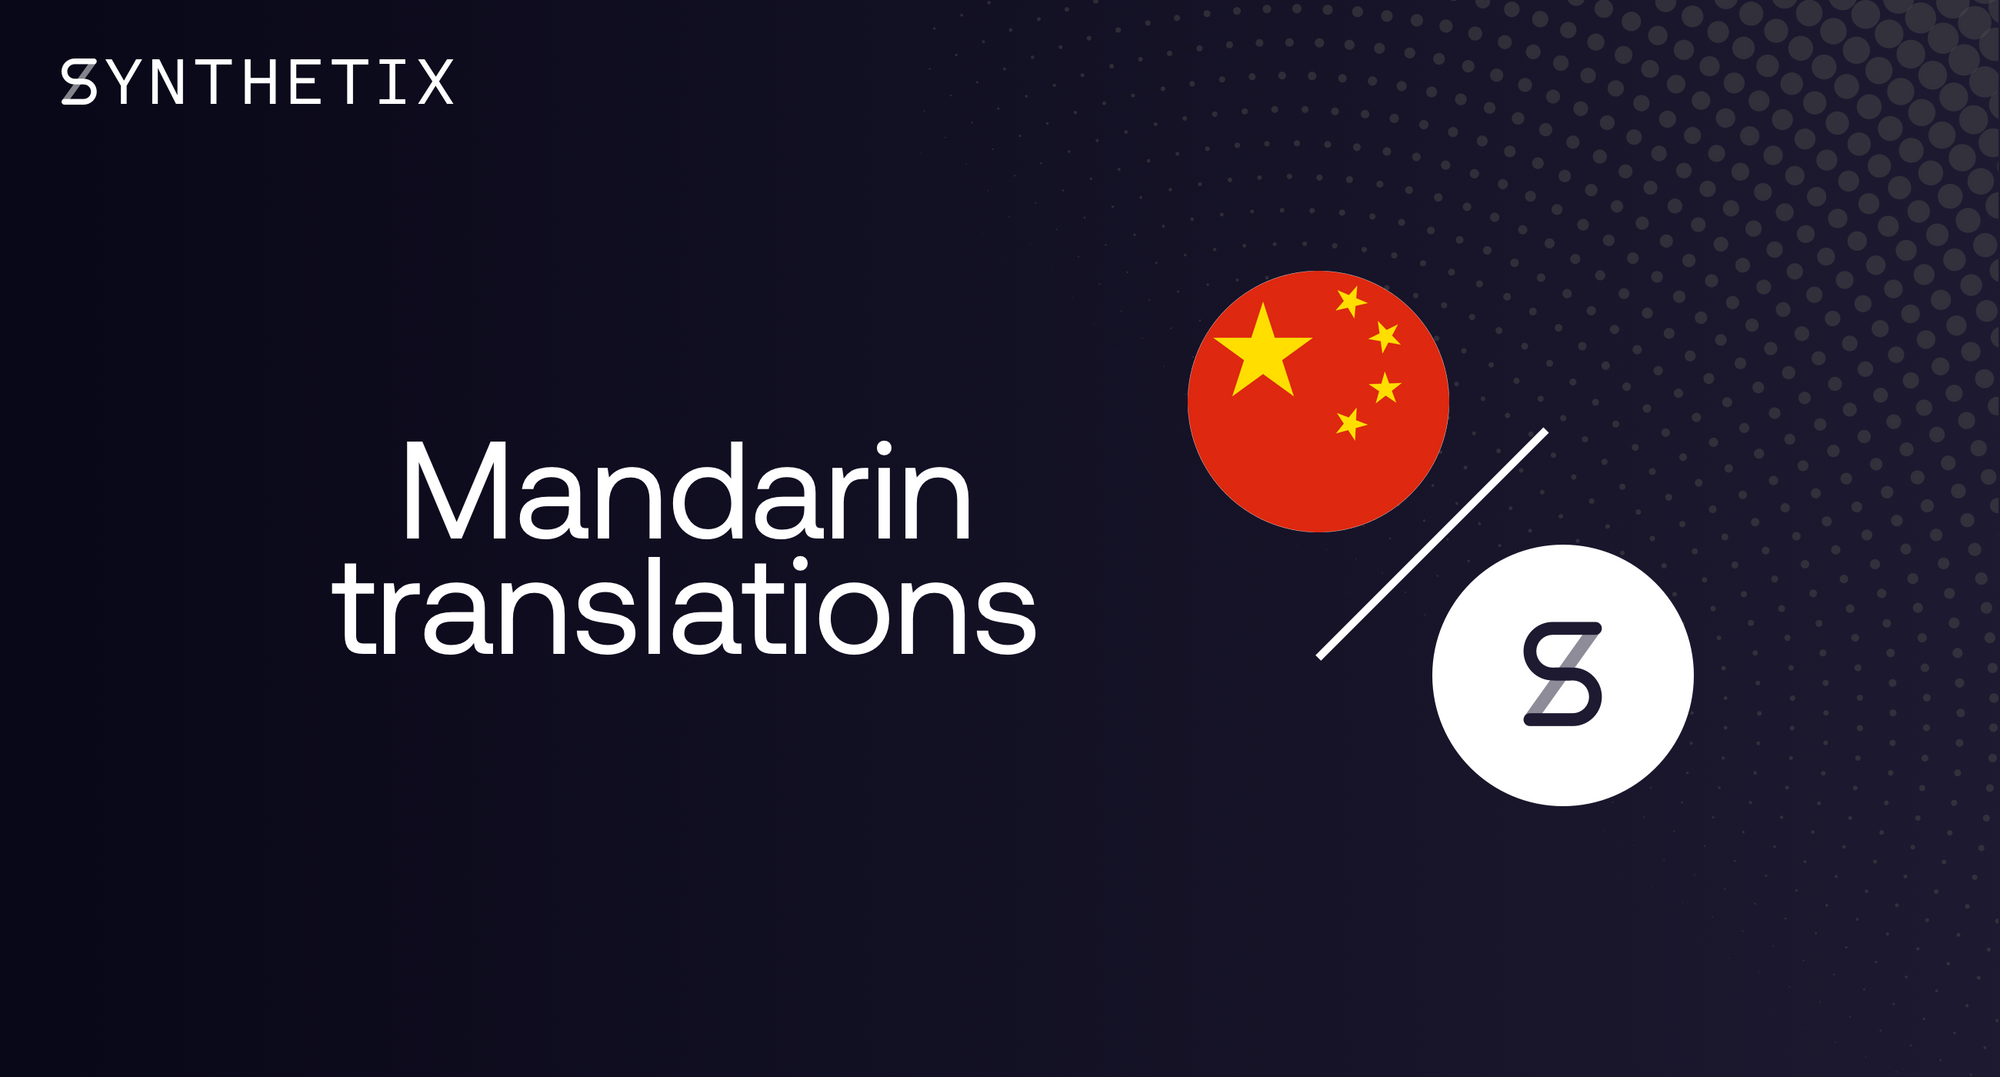 Mintr and the litepaper are now available in Mandarin!